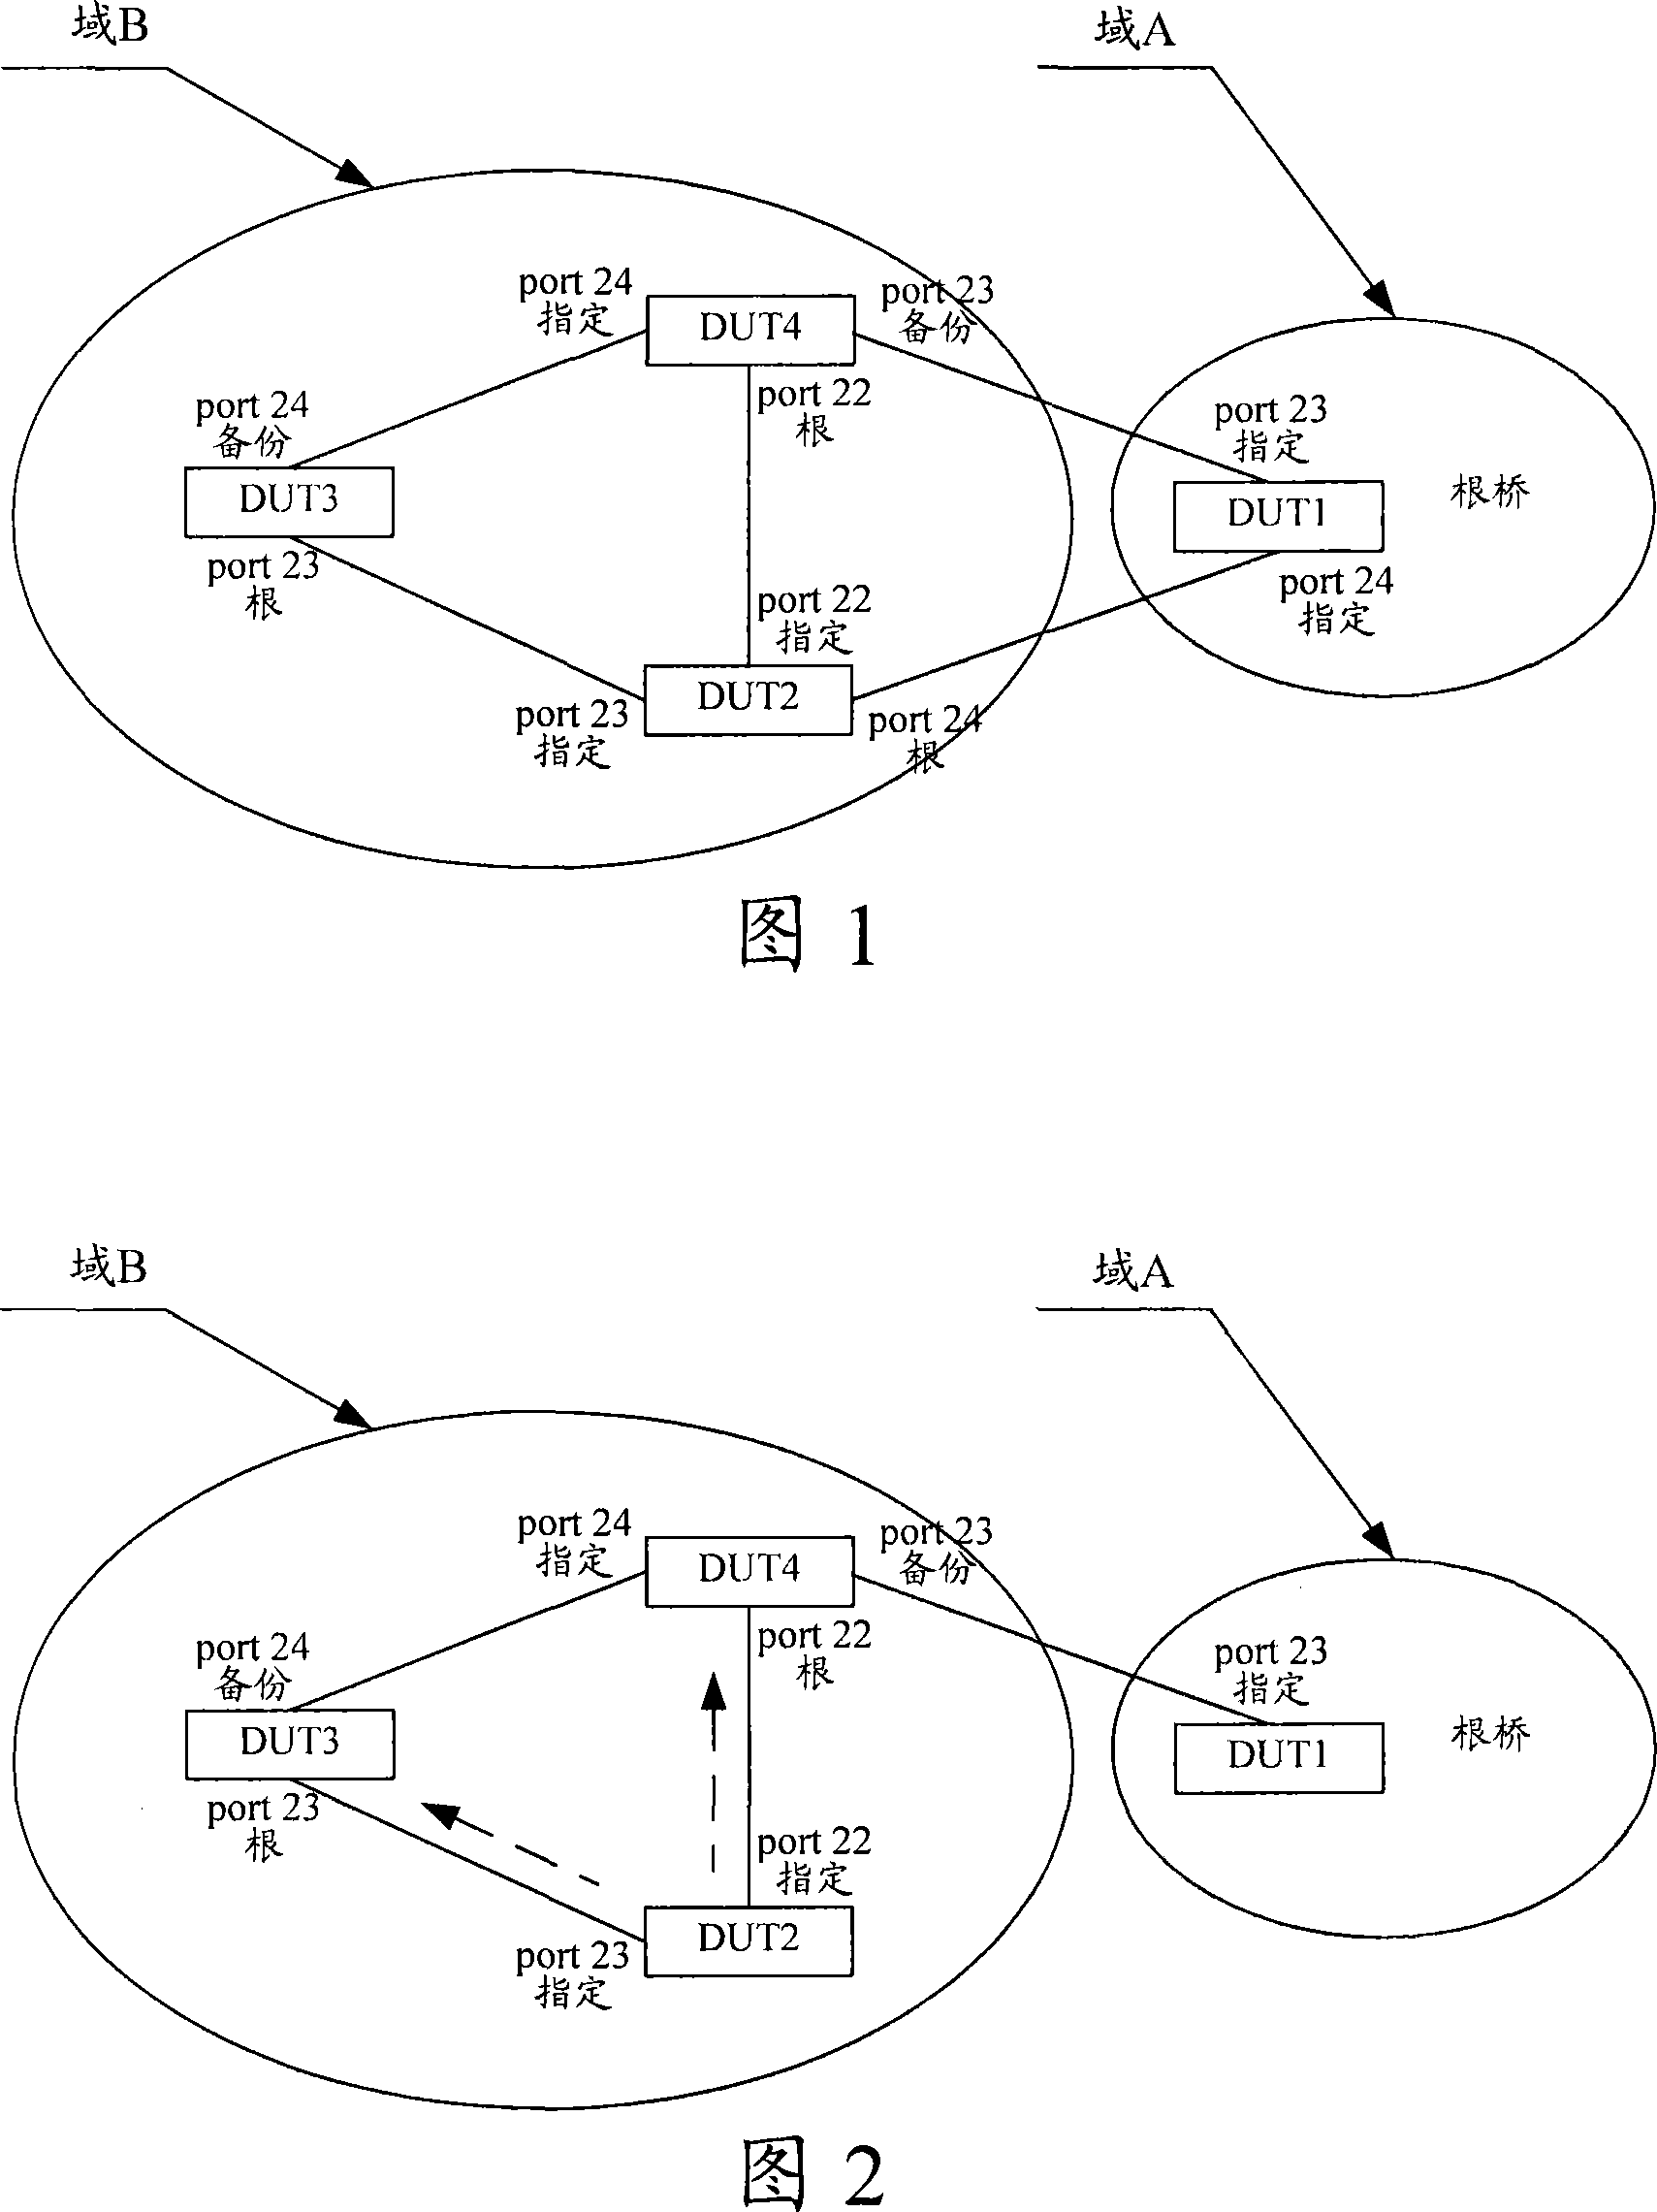 Equipment and method for speeding up poly spanning tree protocol network topological convergence